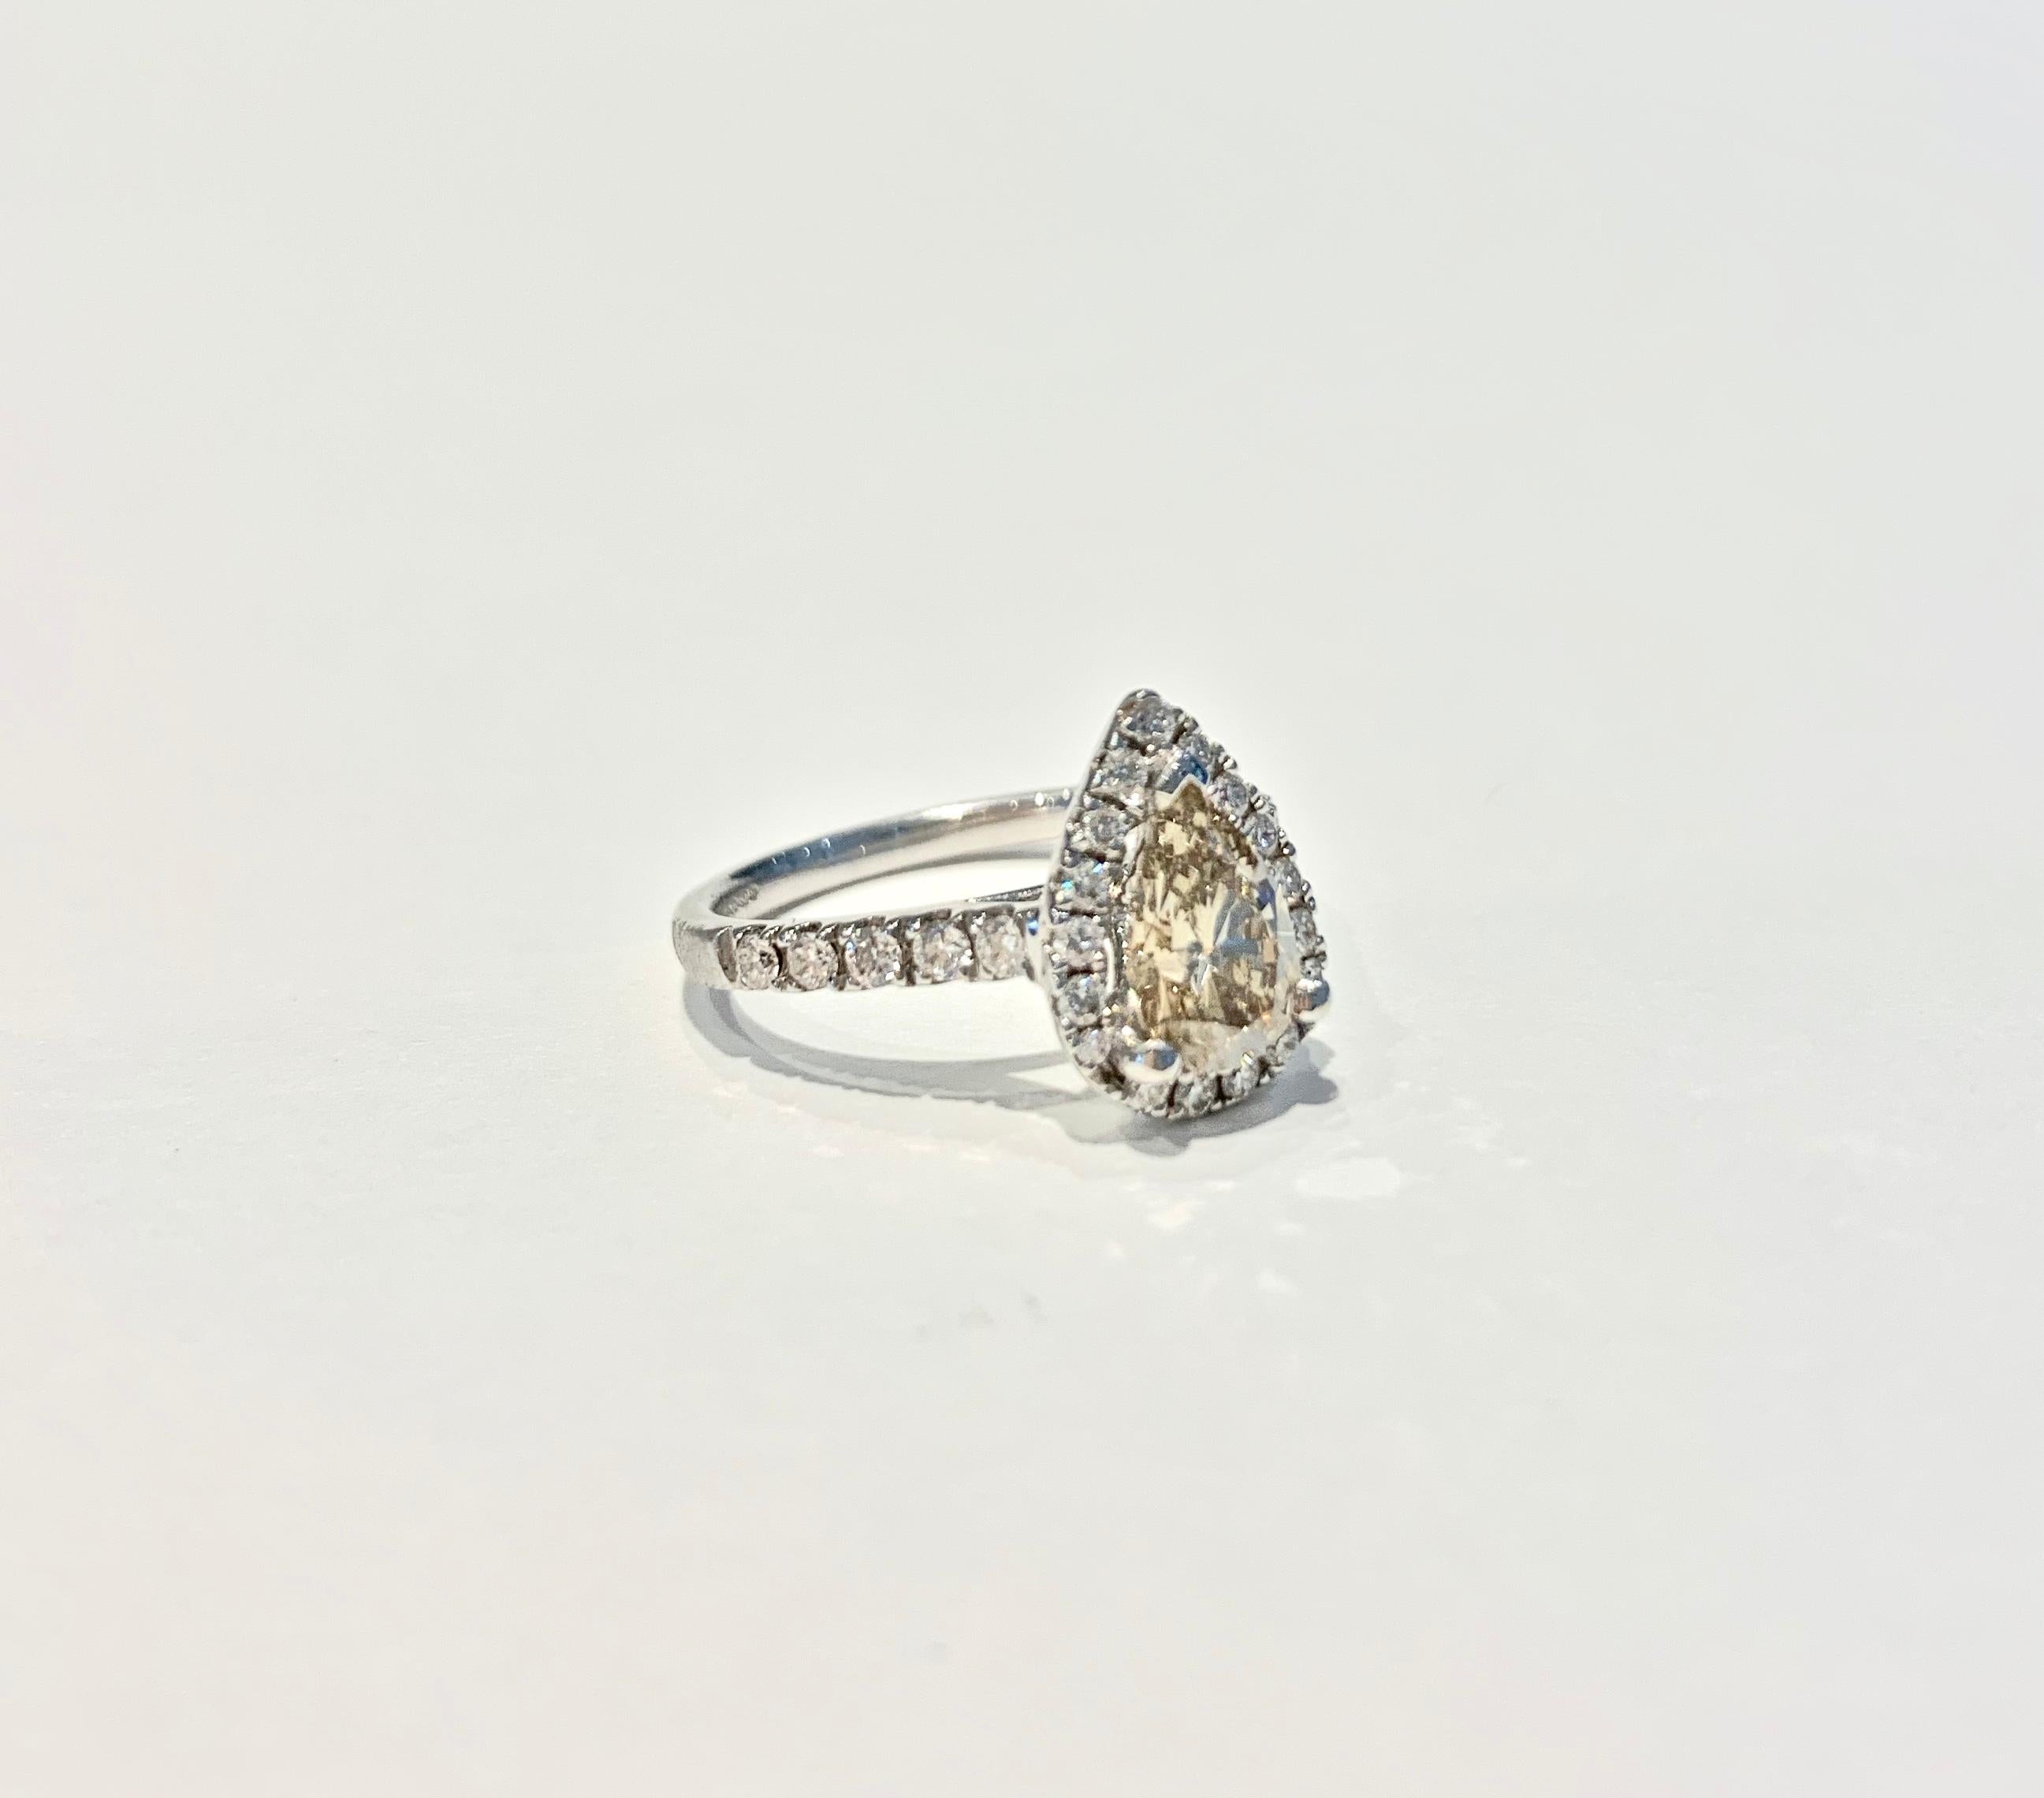 Modern GIA 1.07 Carat Fancy Color Pear Cut Diamond Ring in 18 Carat Gold Halo Setting For Sale